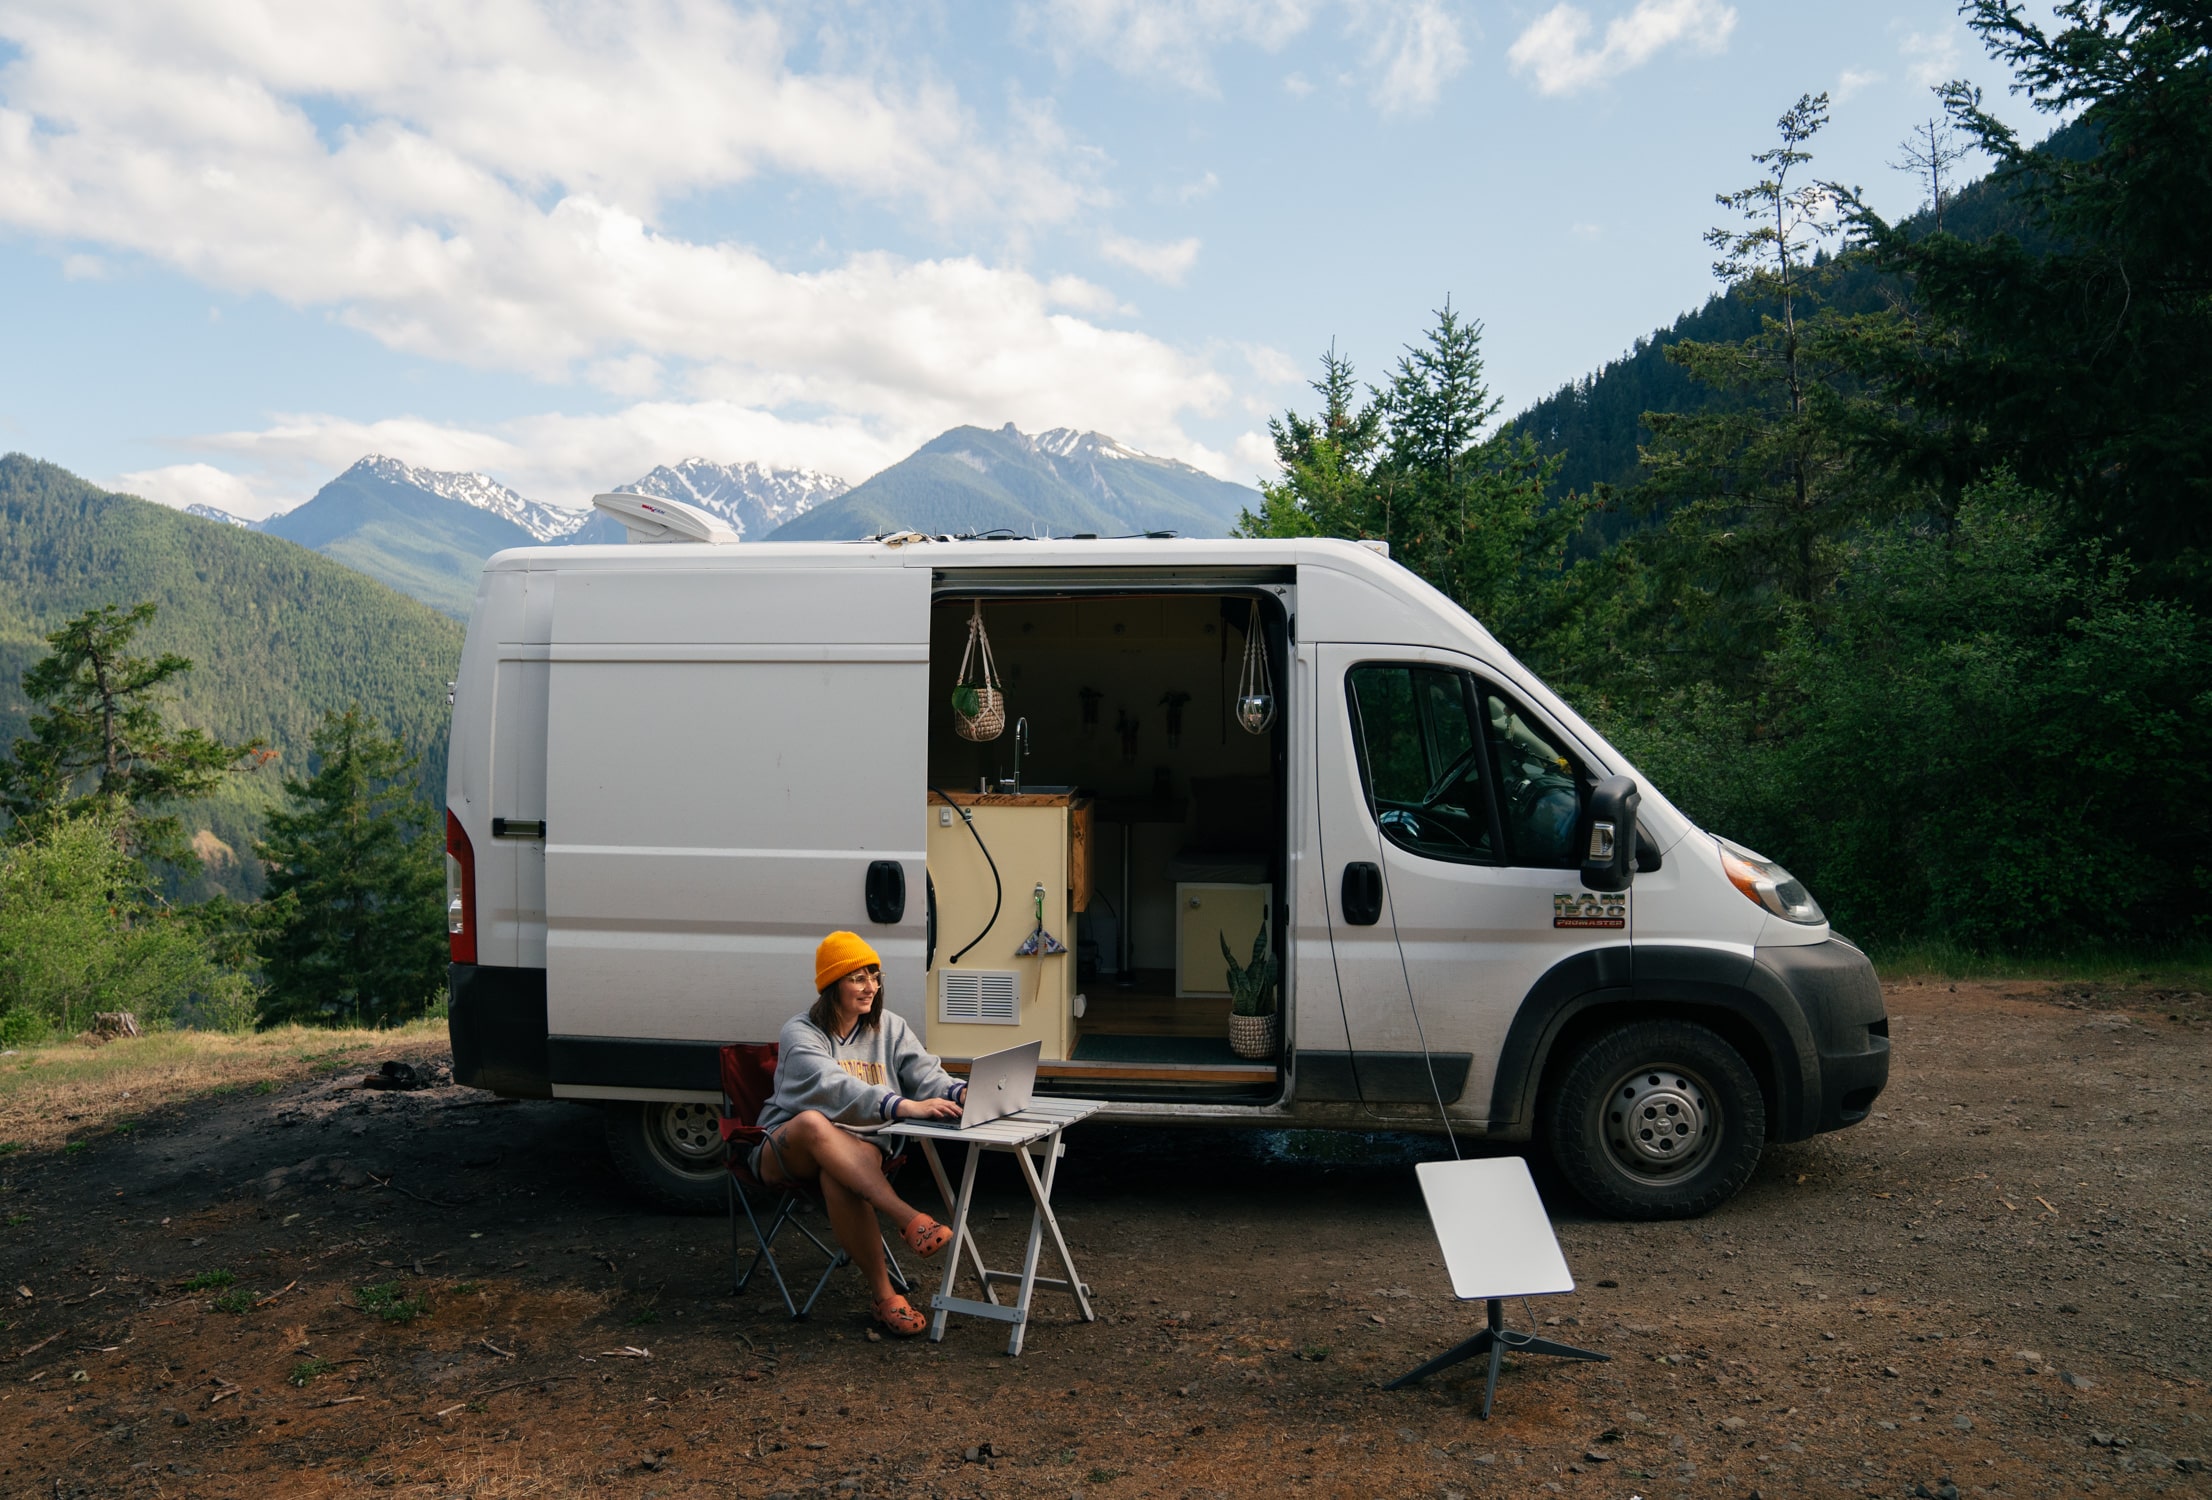 How to Make Money Living in a Van